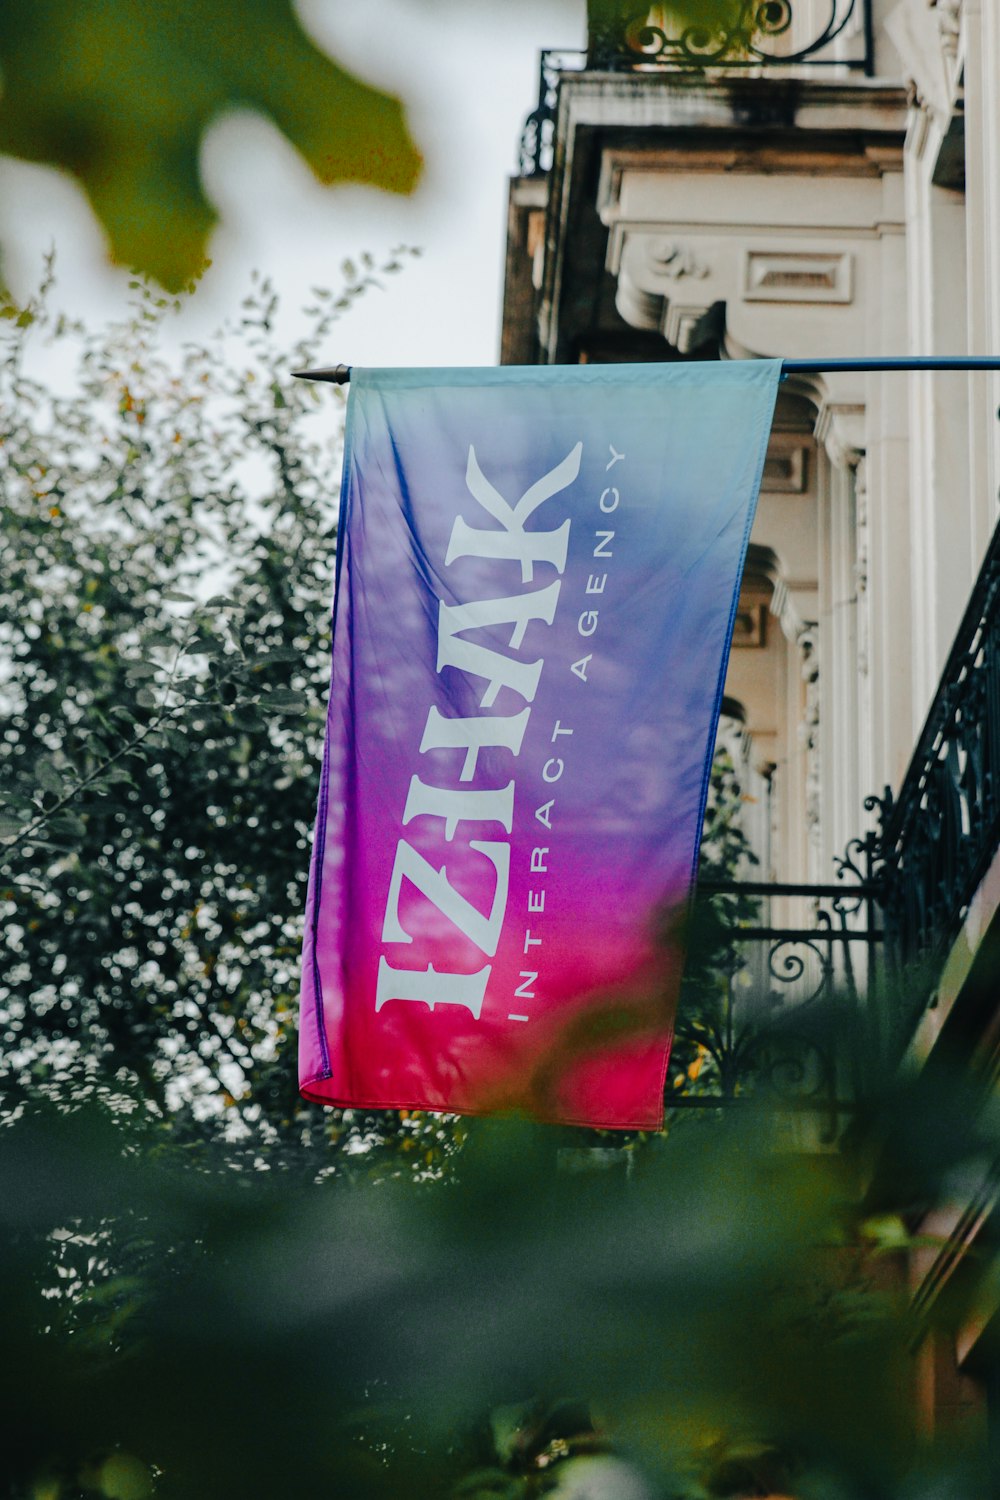 a purple and blue banner hanging from a balcony